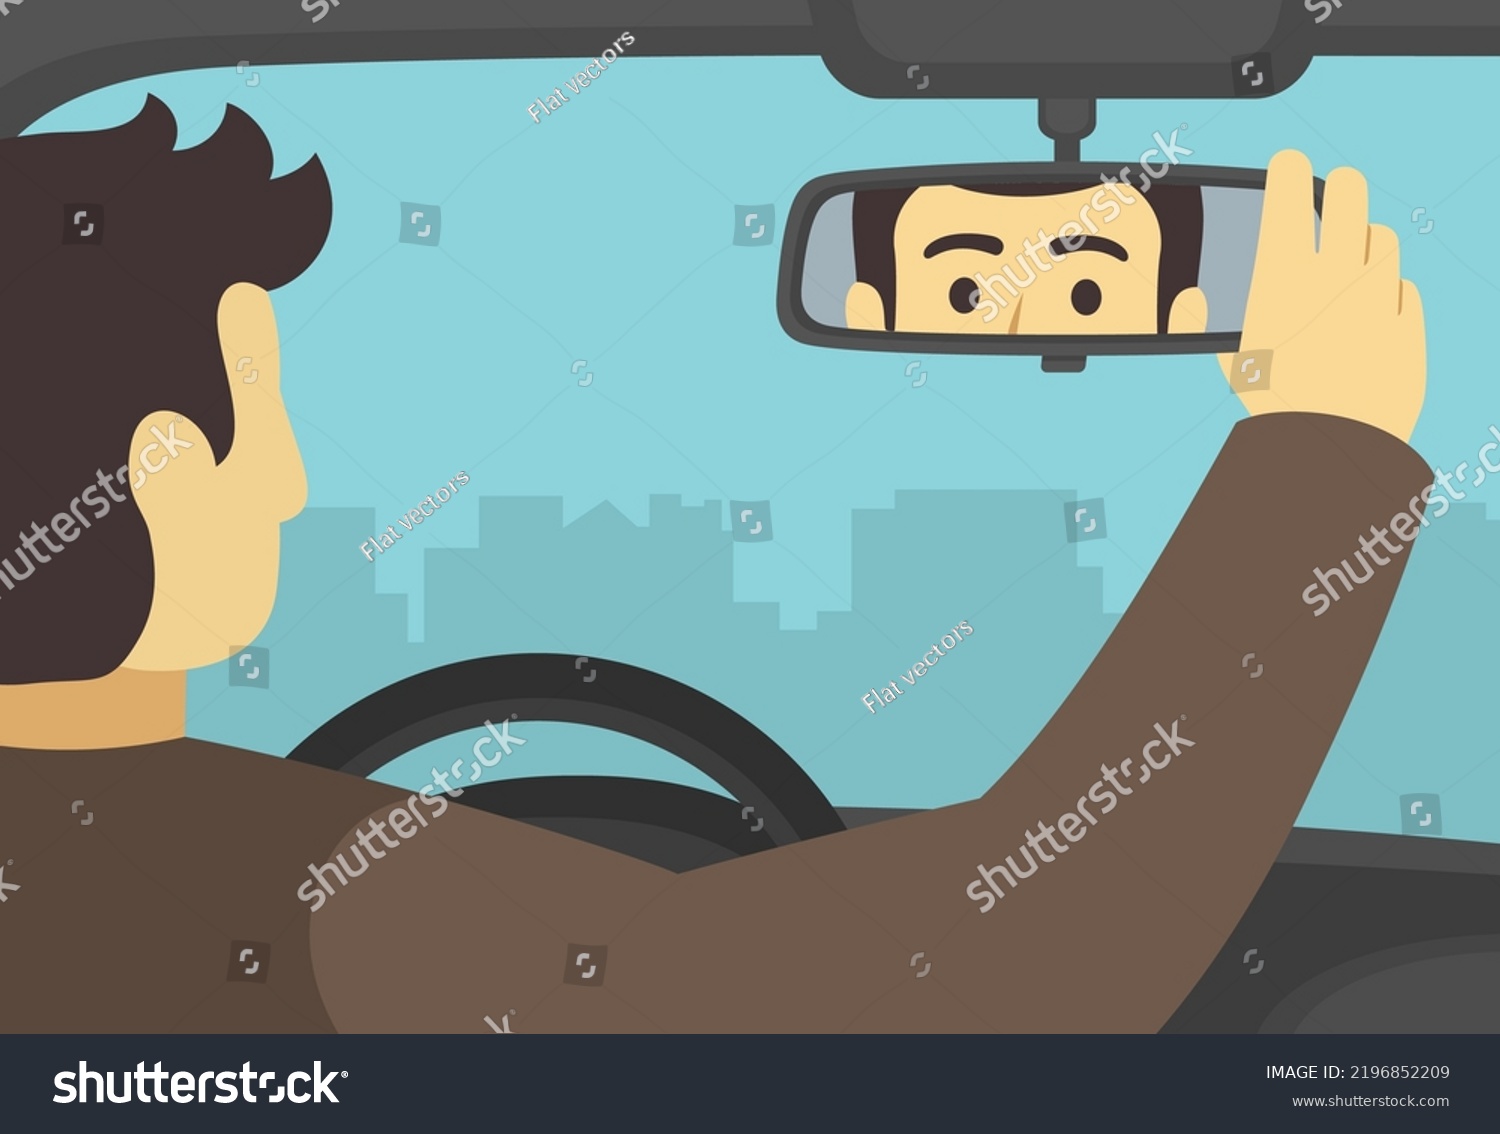 SVG of Male car driver adjusting rear view mirror in a car. Close-up back view of a driver checking rear mirror. Flat vector illustration template. svg